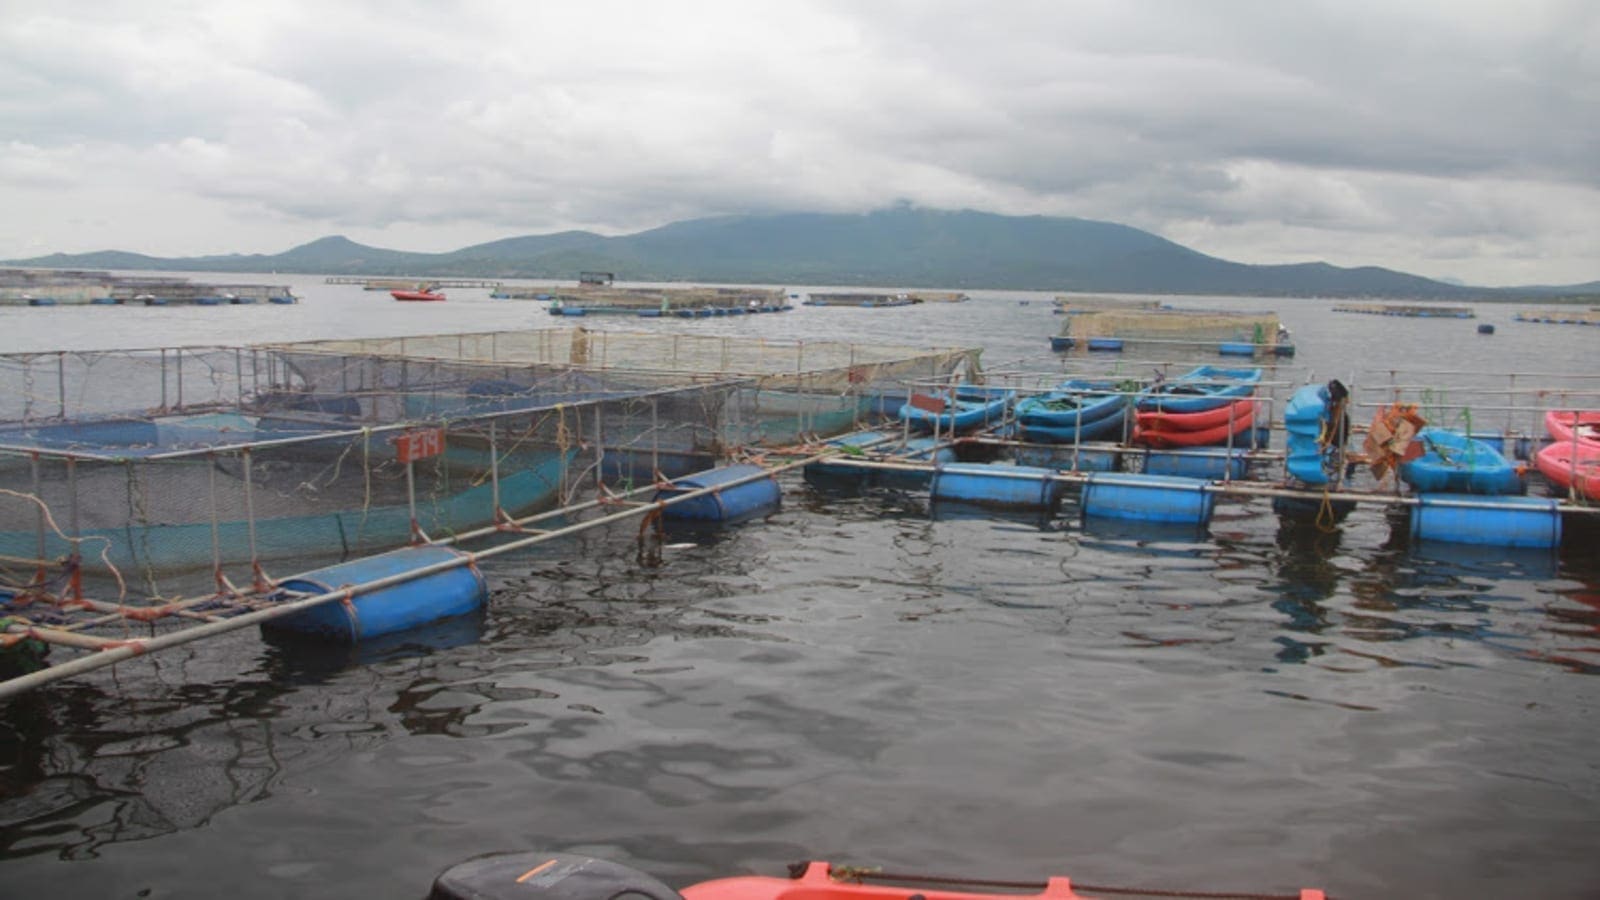 Kenyan based aquaculture business Victory Farms gets backing from Impact investor DOB Equity